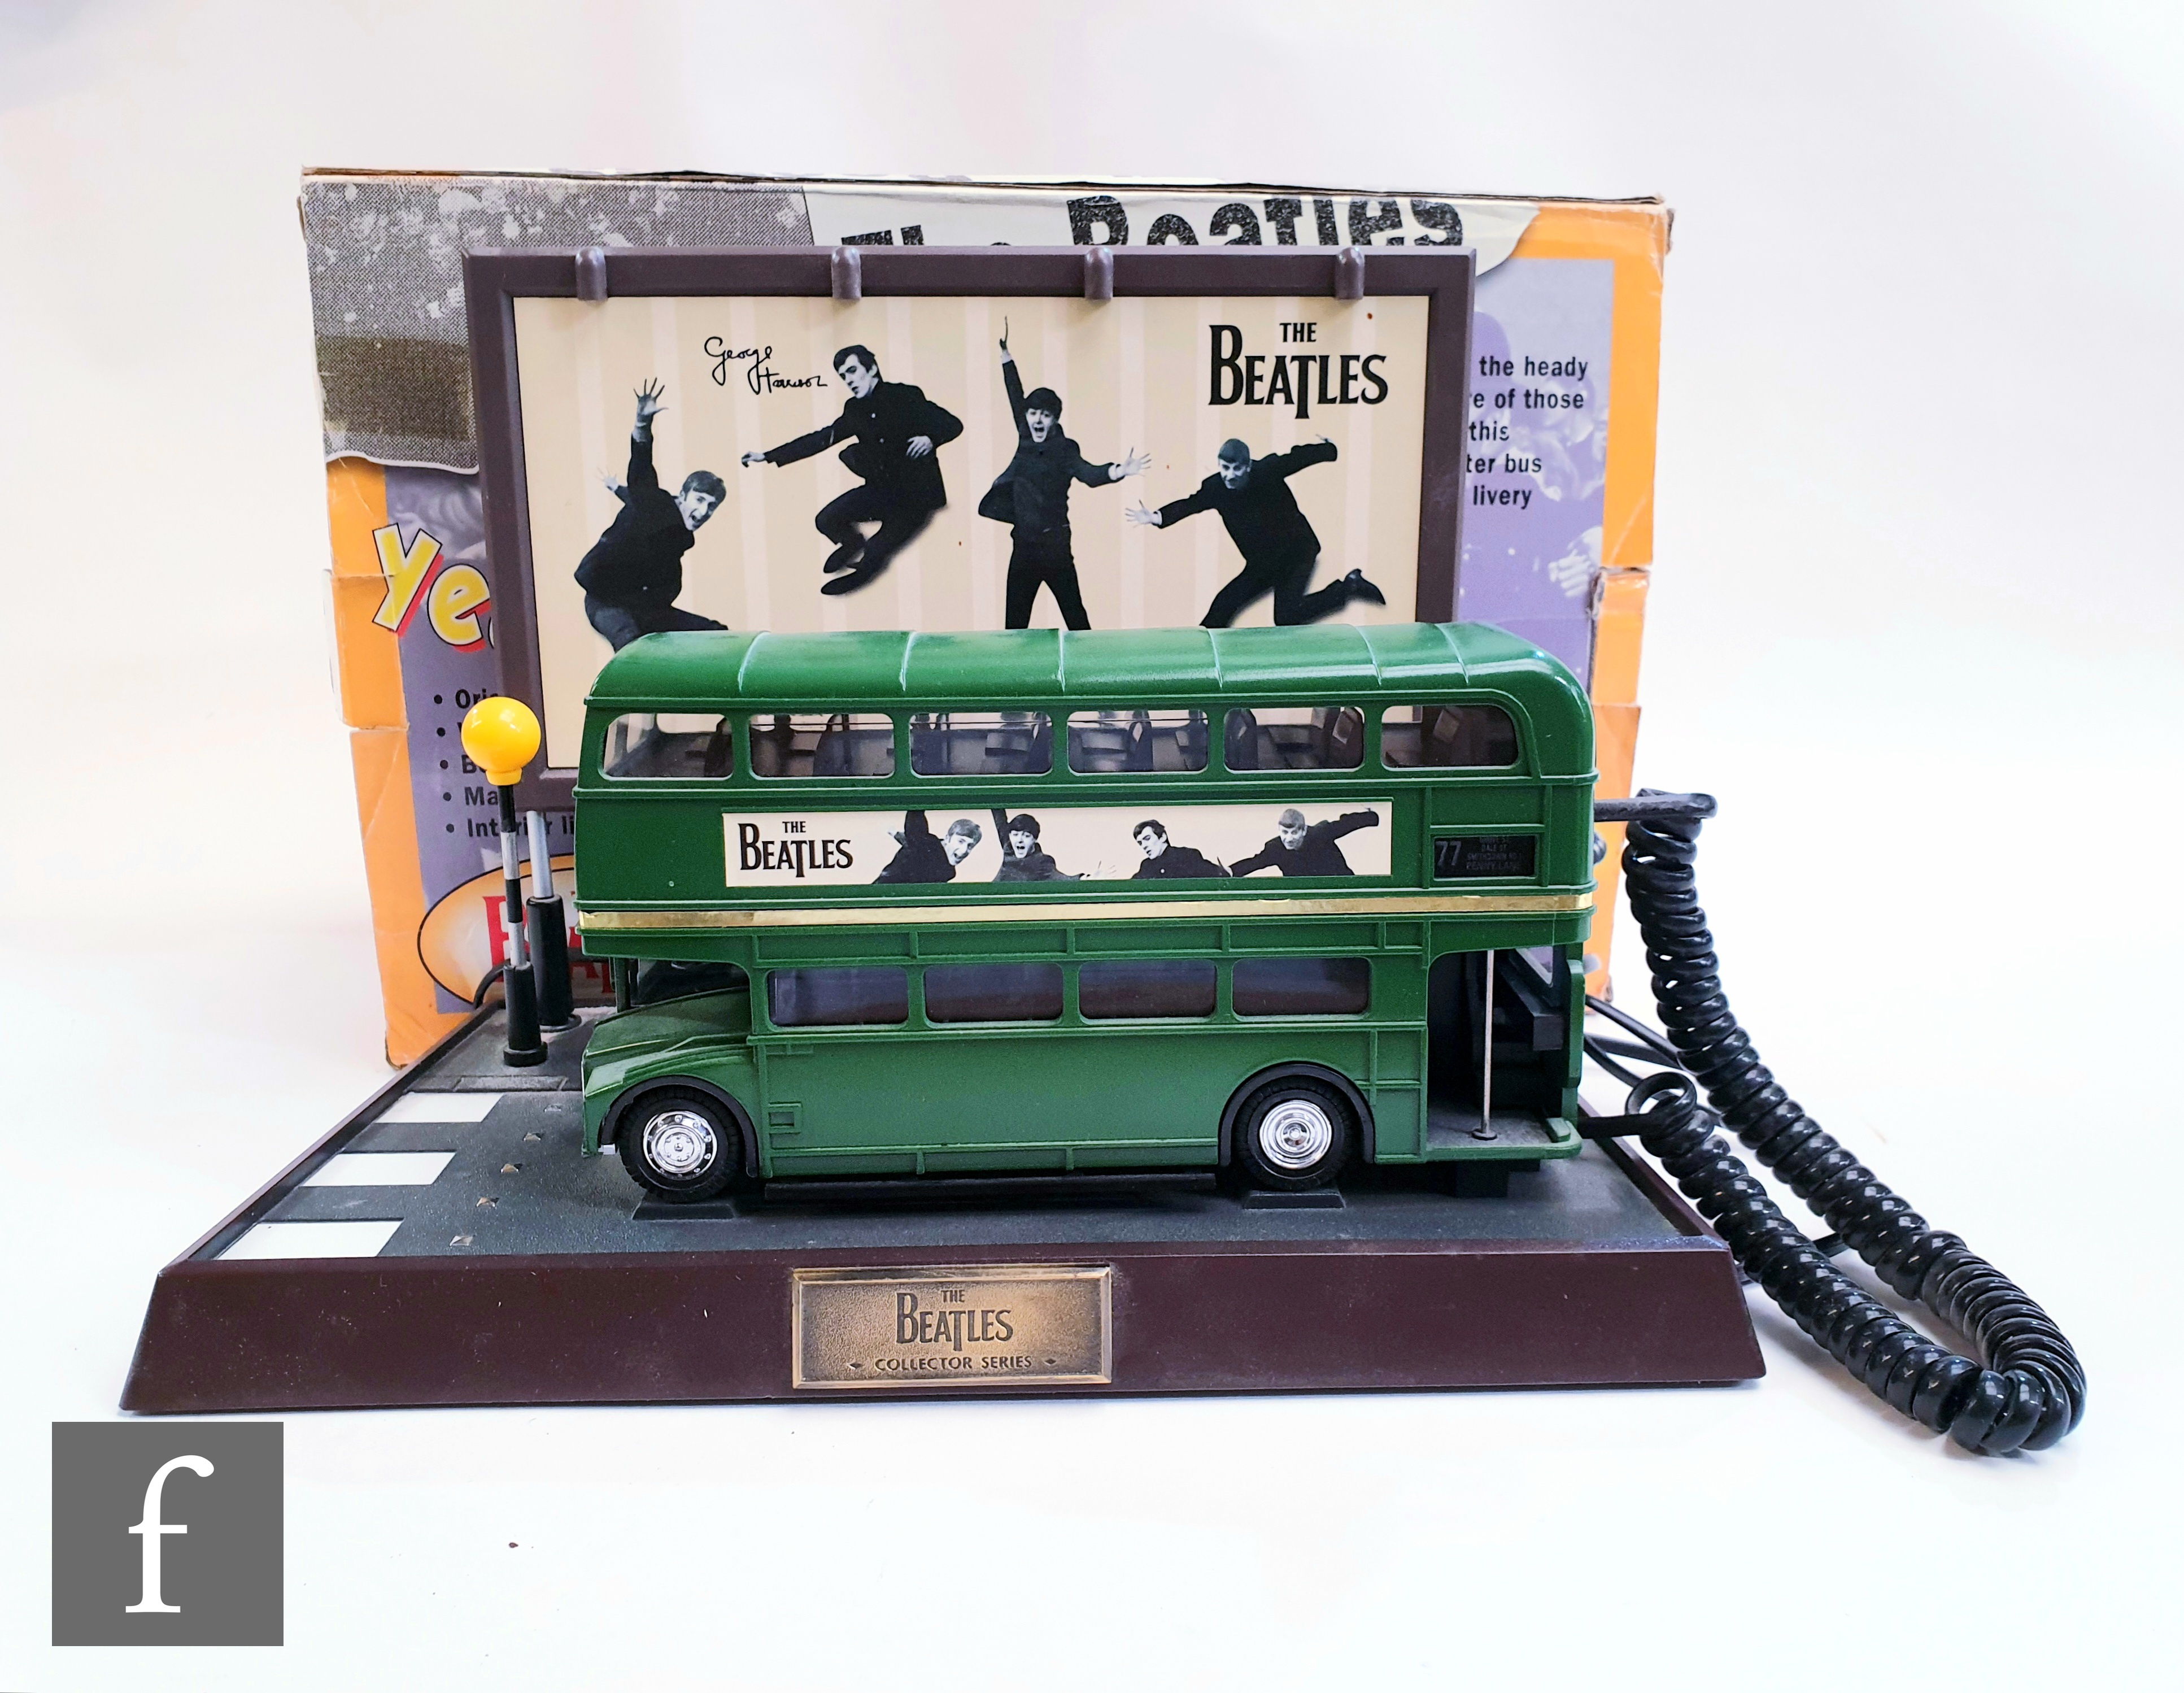 A vintage Beatles collection telephone, the original 1998 Apple licensed novelty telephone in the